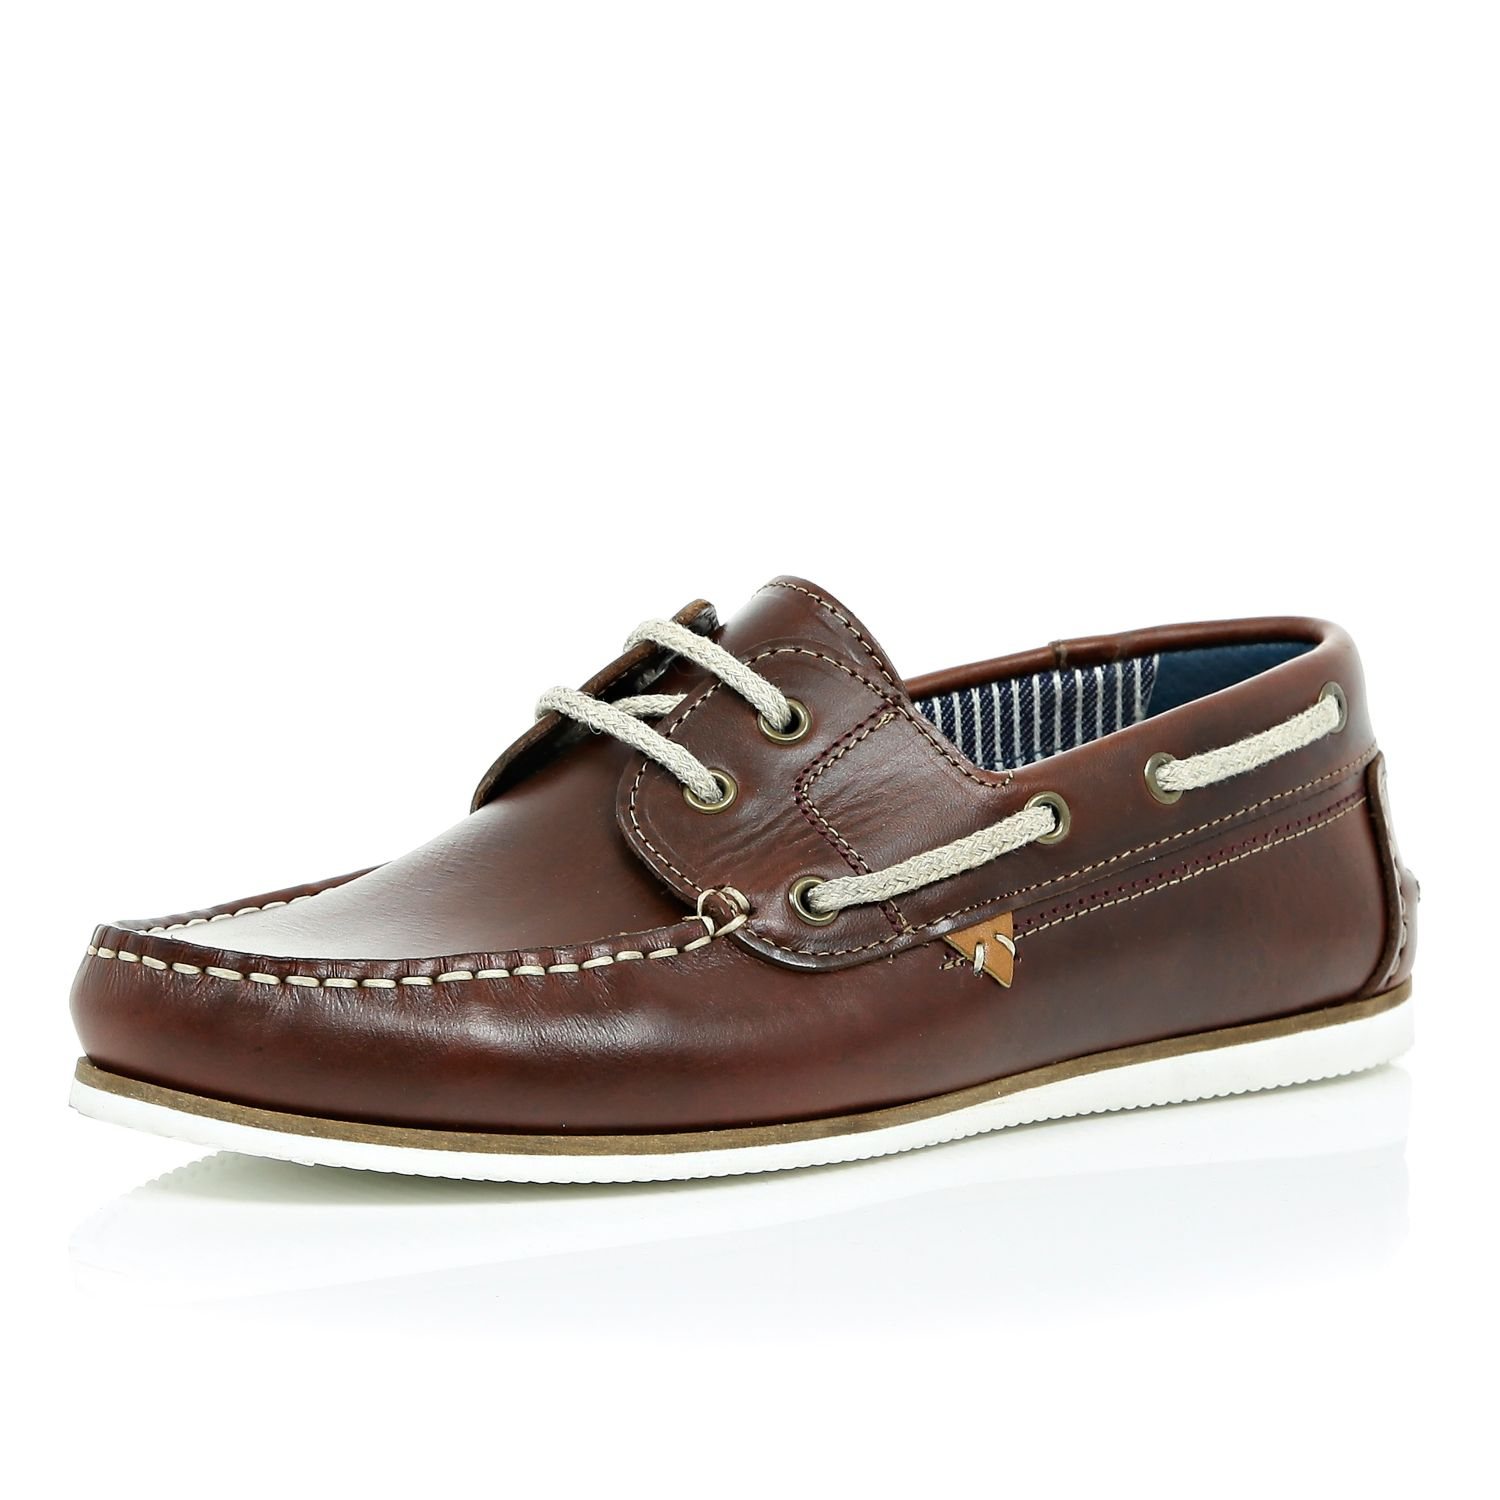 Lyst - River Island Brown Leather Boat Shoes in Brown for Men